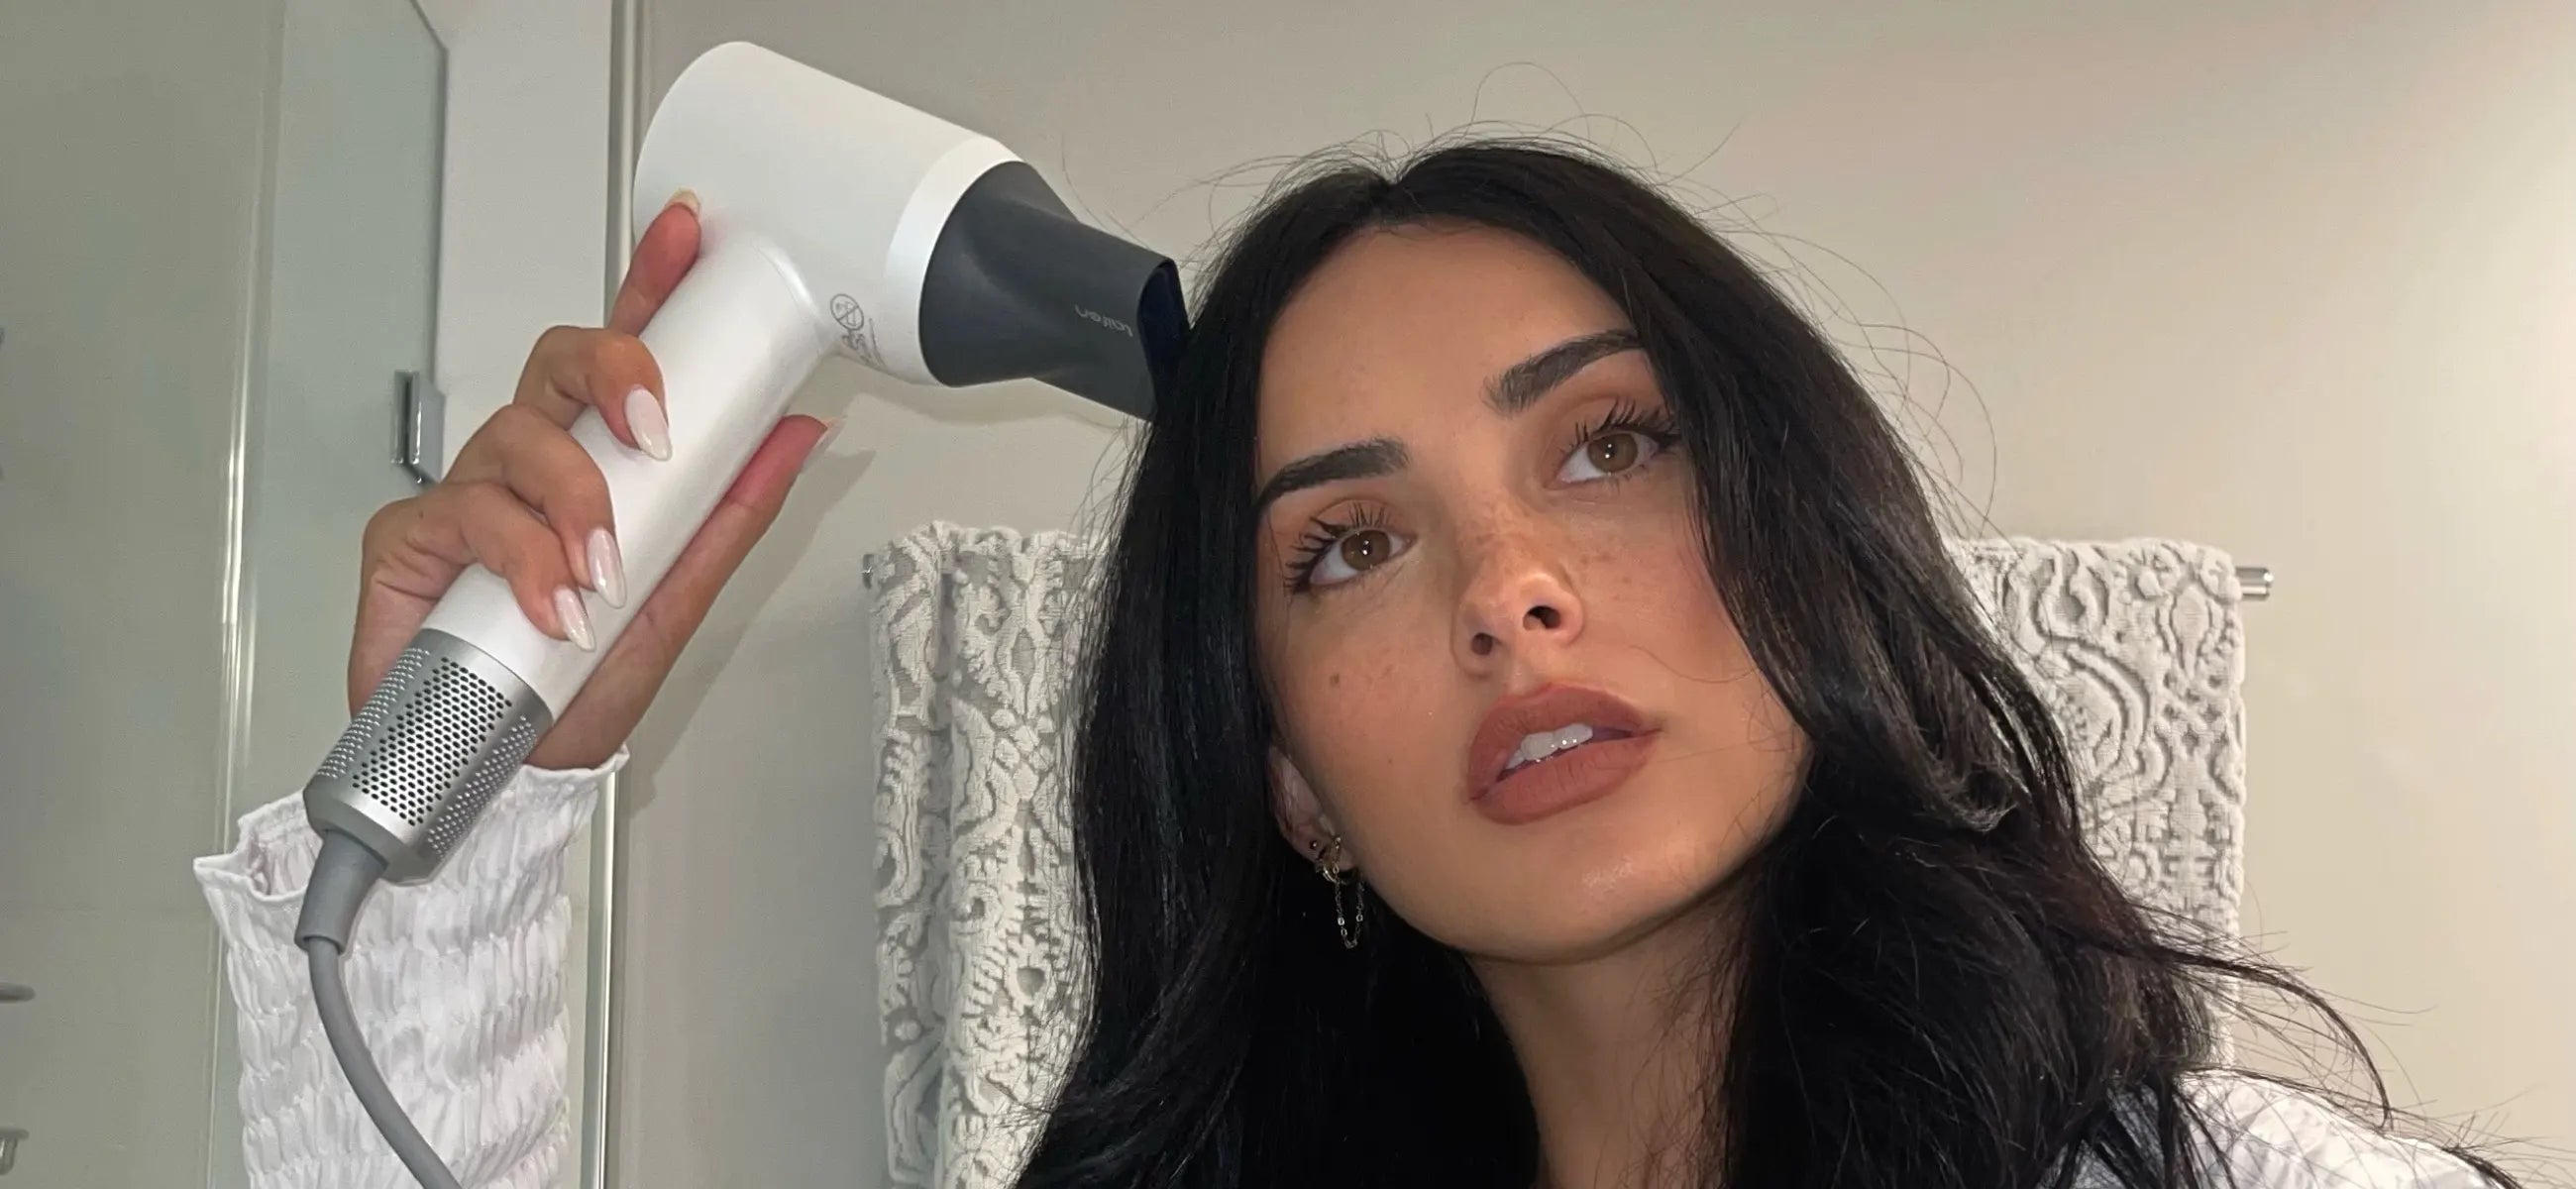 Top best hair dryers for adding volume: How to blow out hait to add volume?